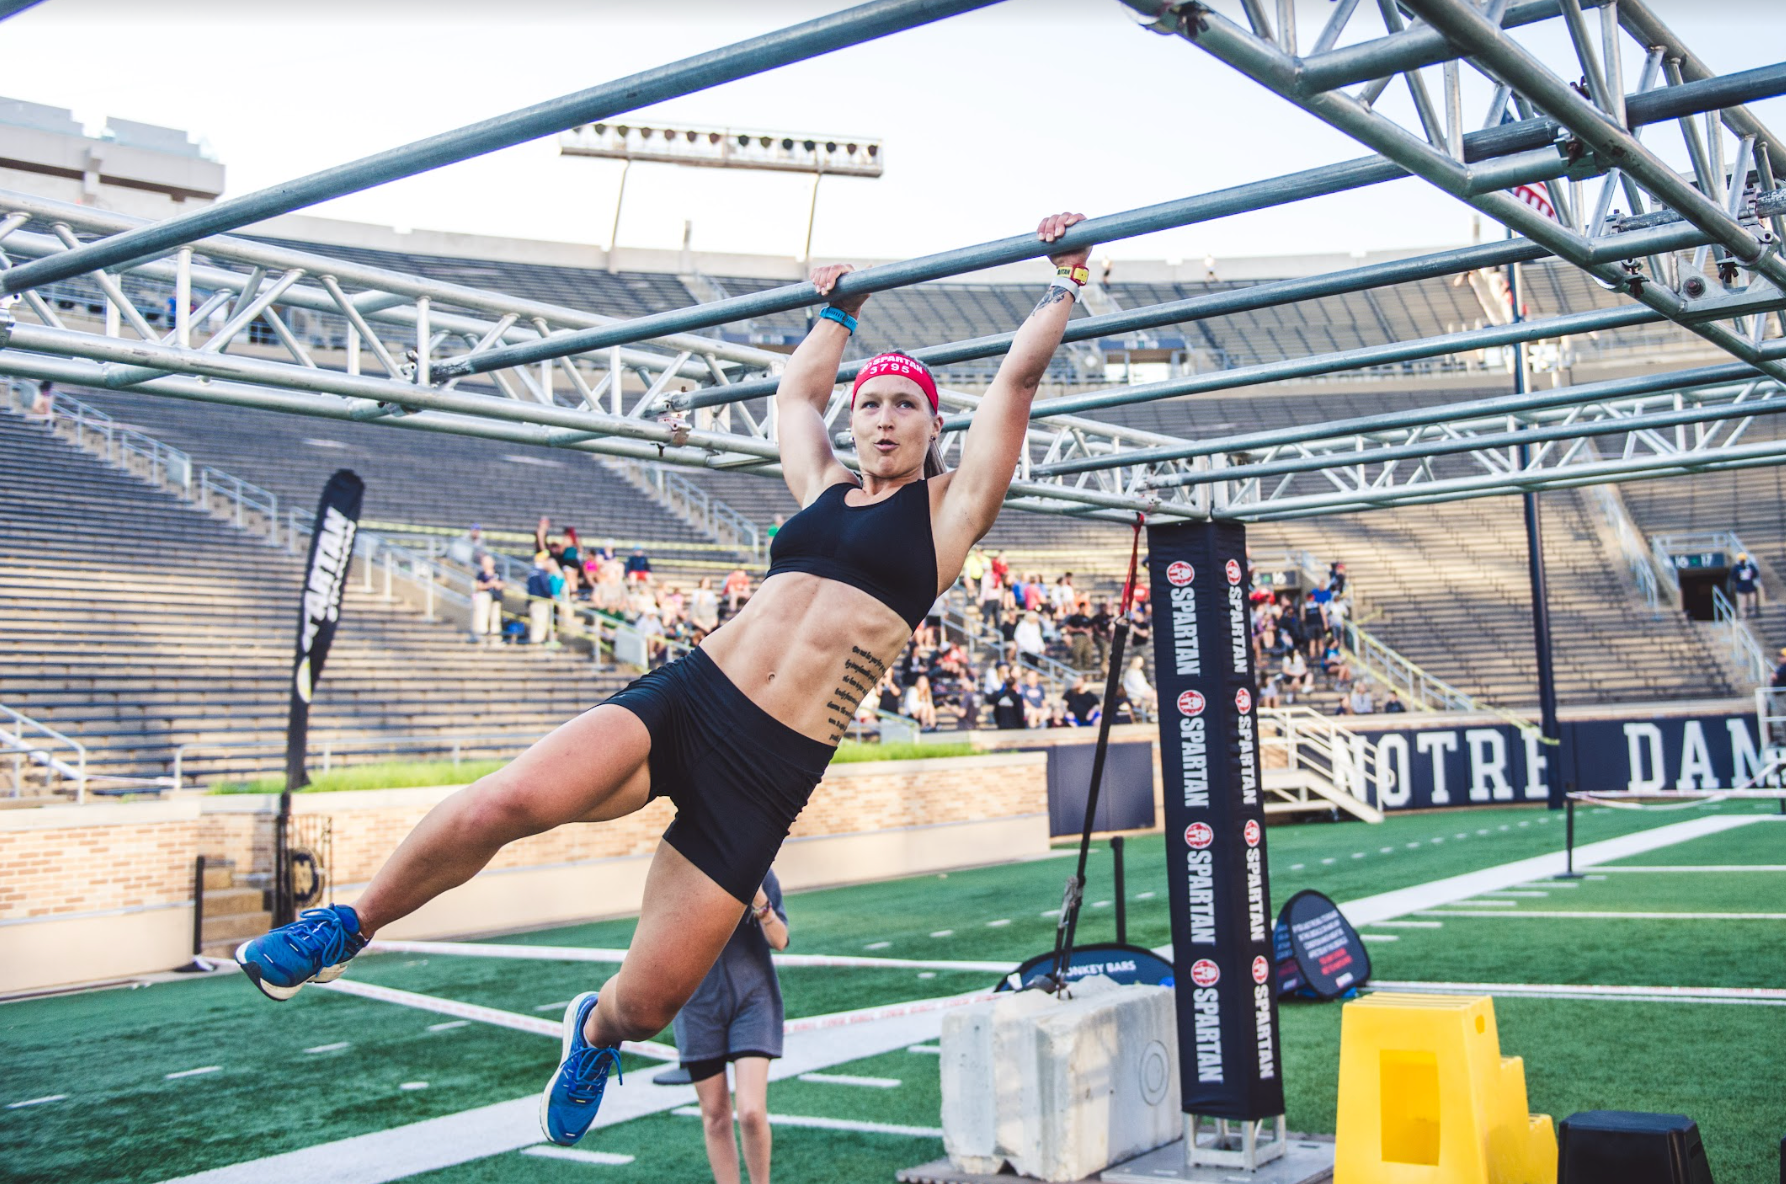 a spartan racer completing the monkey bars obstacle at a stadion race